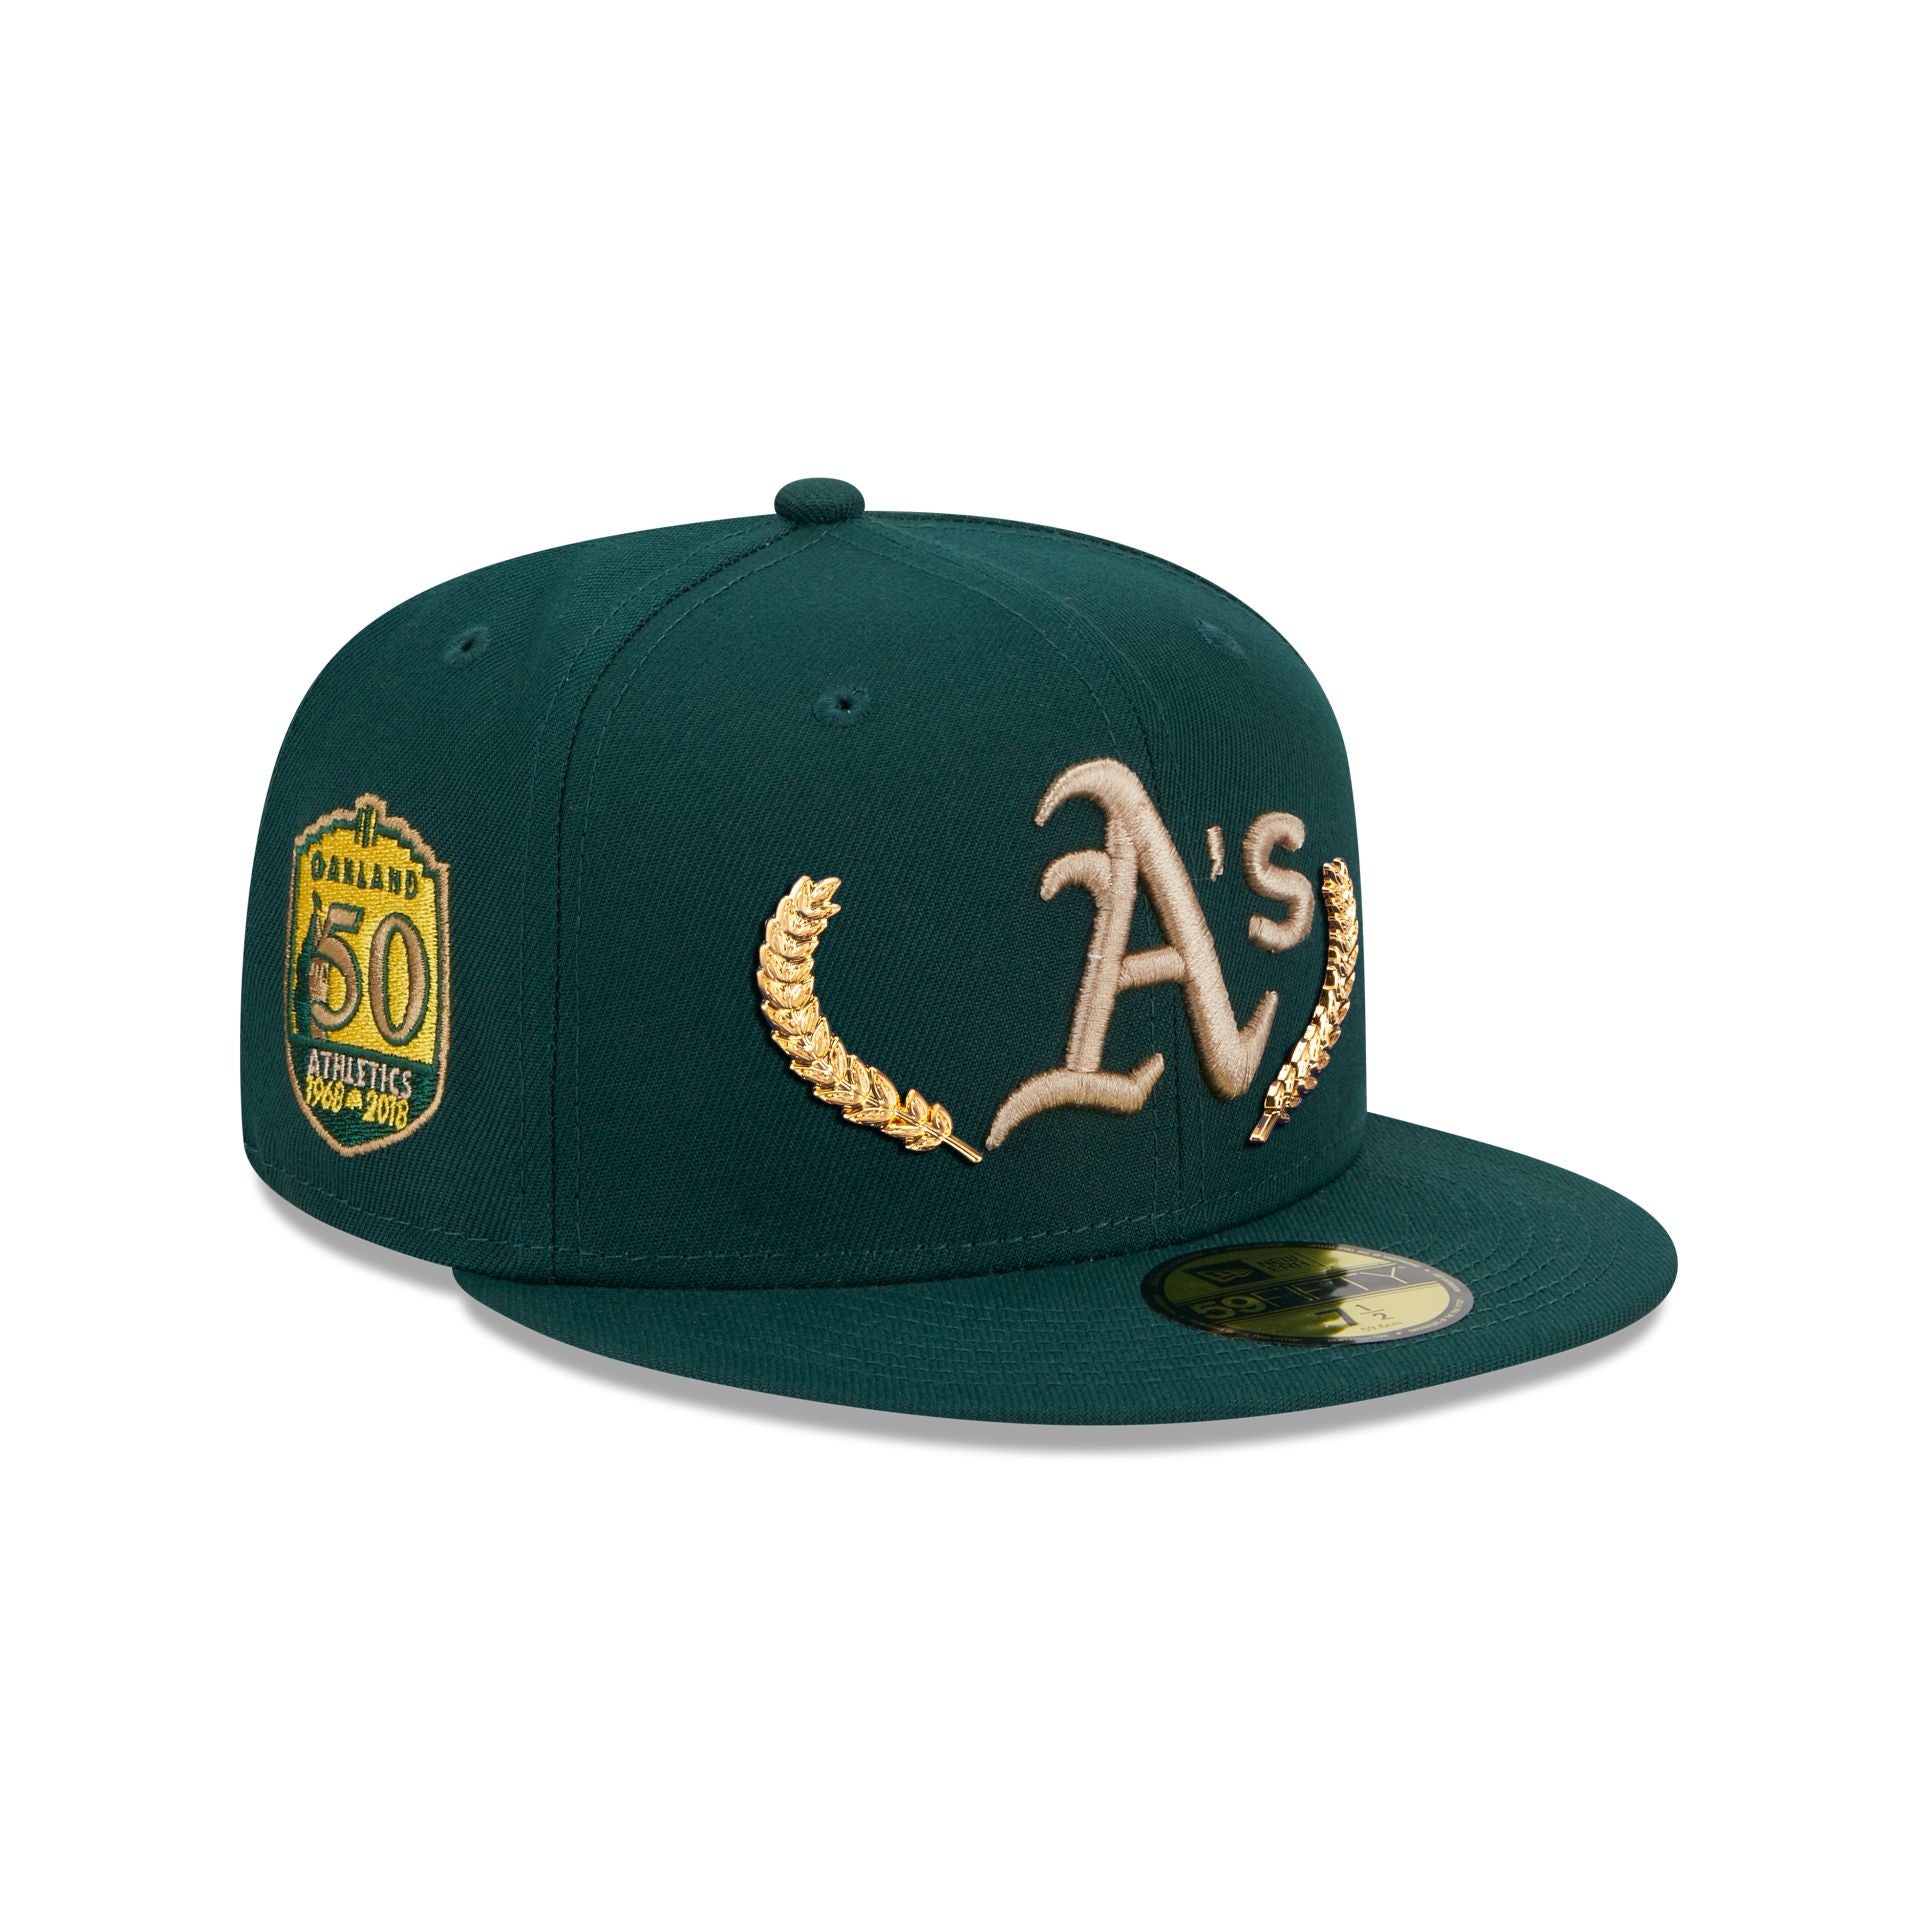 Oakland Athletics Gold Leaf 59FIFTY Fitted Hat, Green - Size: 7 7/8, MLB by New Era